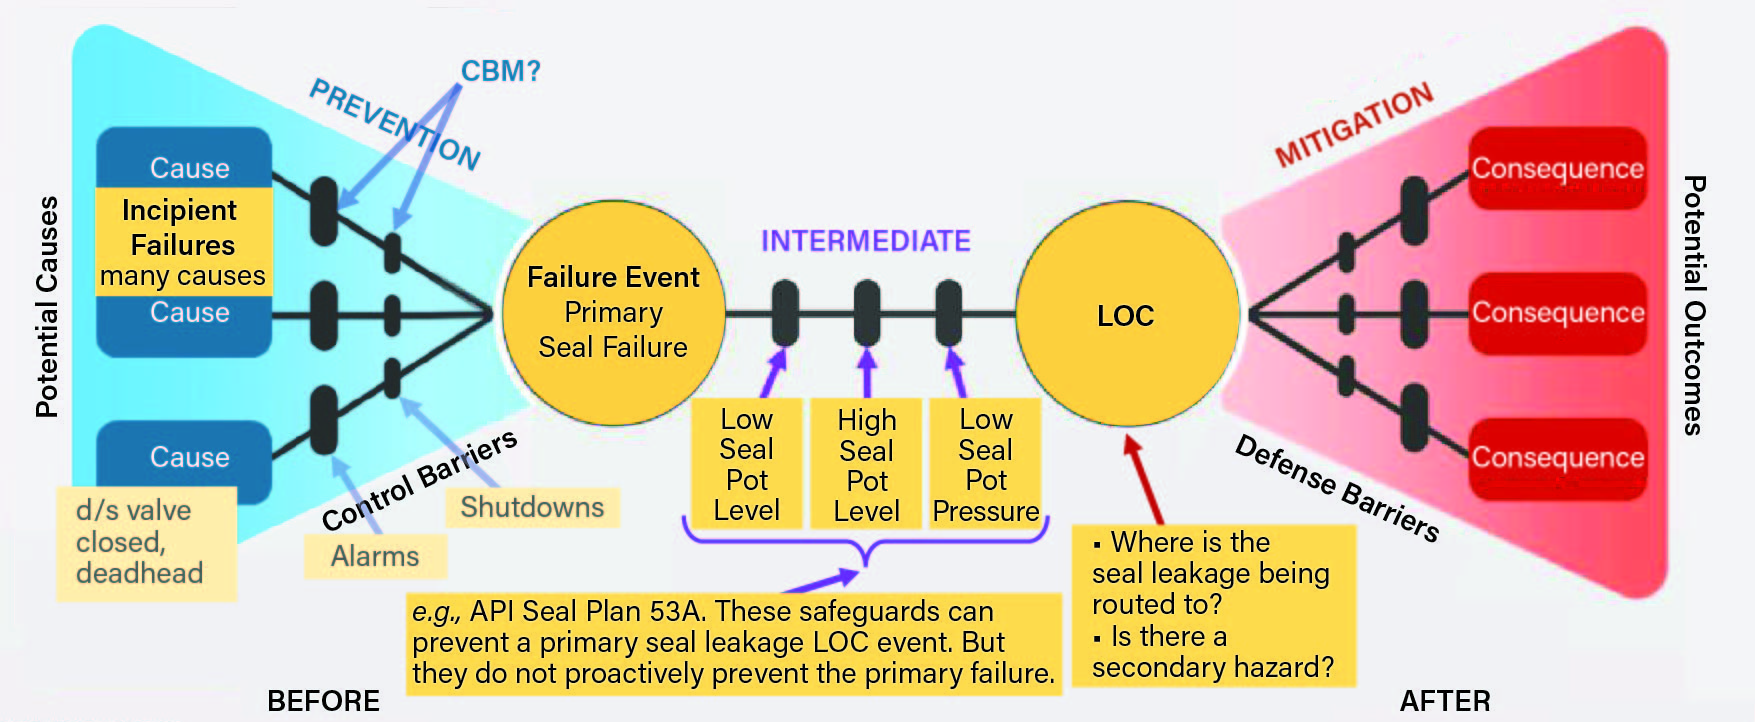 For pumps with a dual or tandem pump seal, safeguards associated with the seal plan system prevent the LOC event but not the primary seal failure